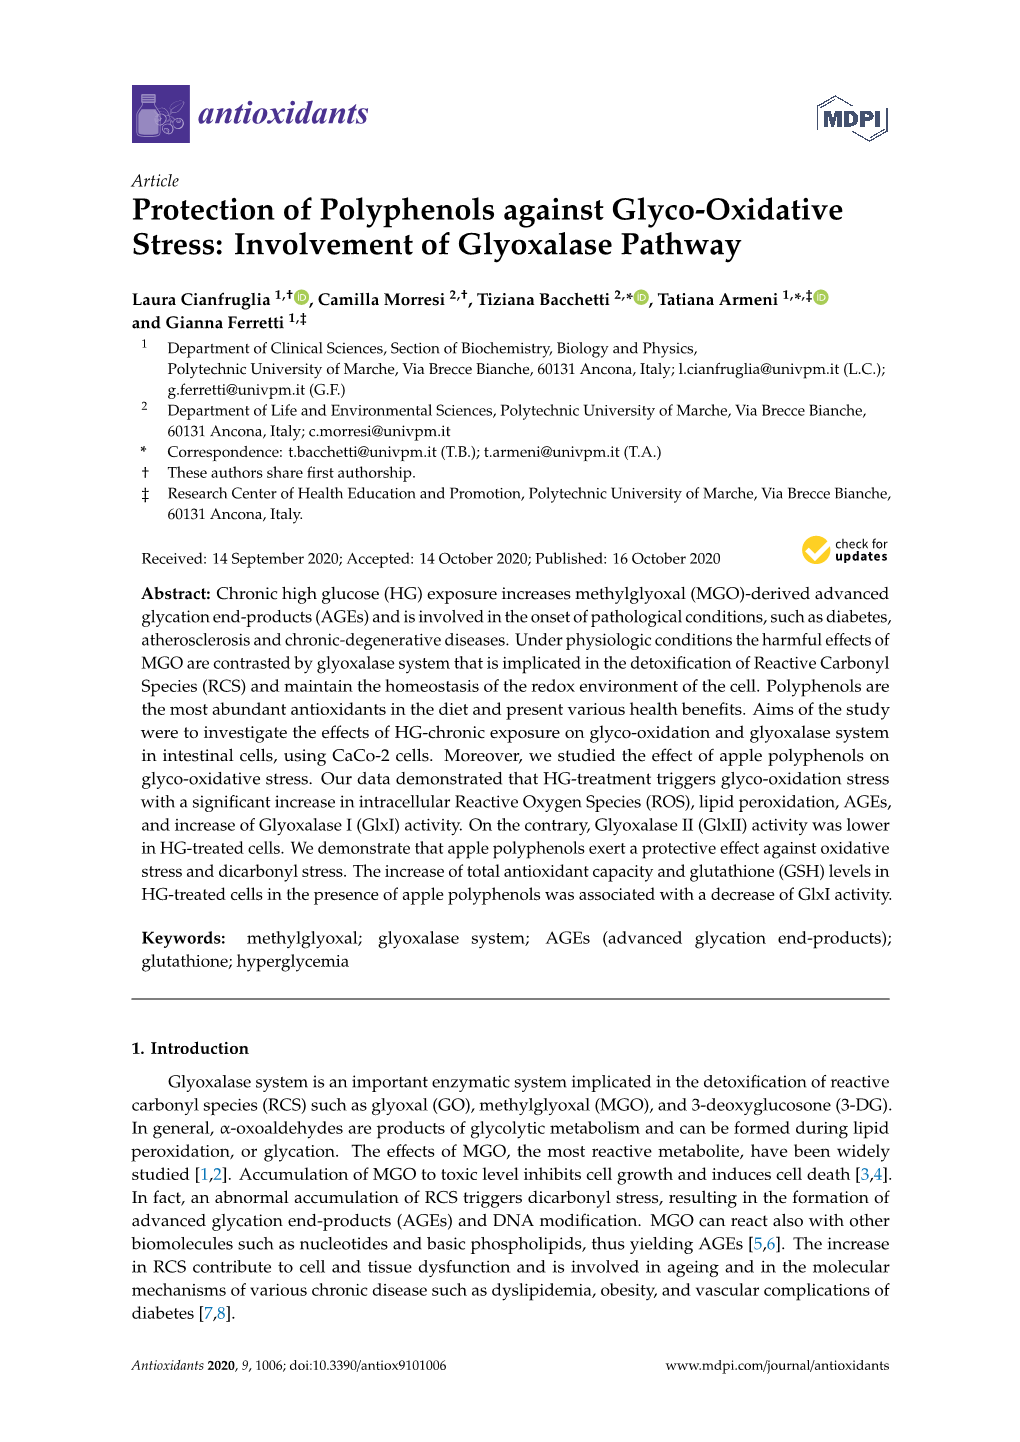 Protection of Polyphenols Against Glyco-Oxidative Stress: Involvement of Glyoxalase Pathway